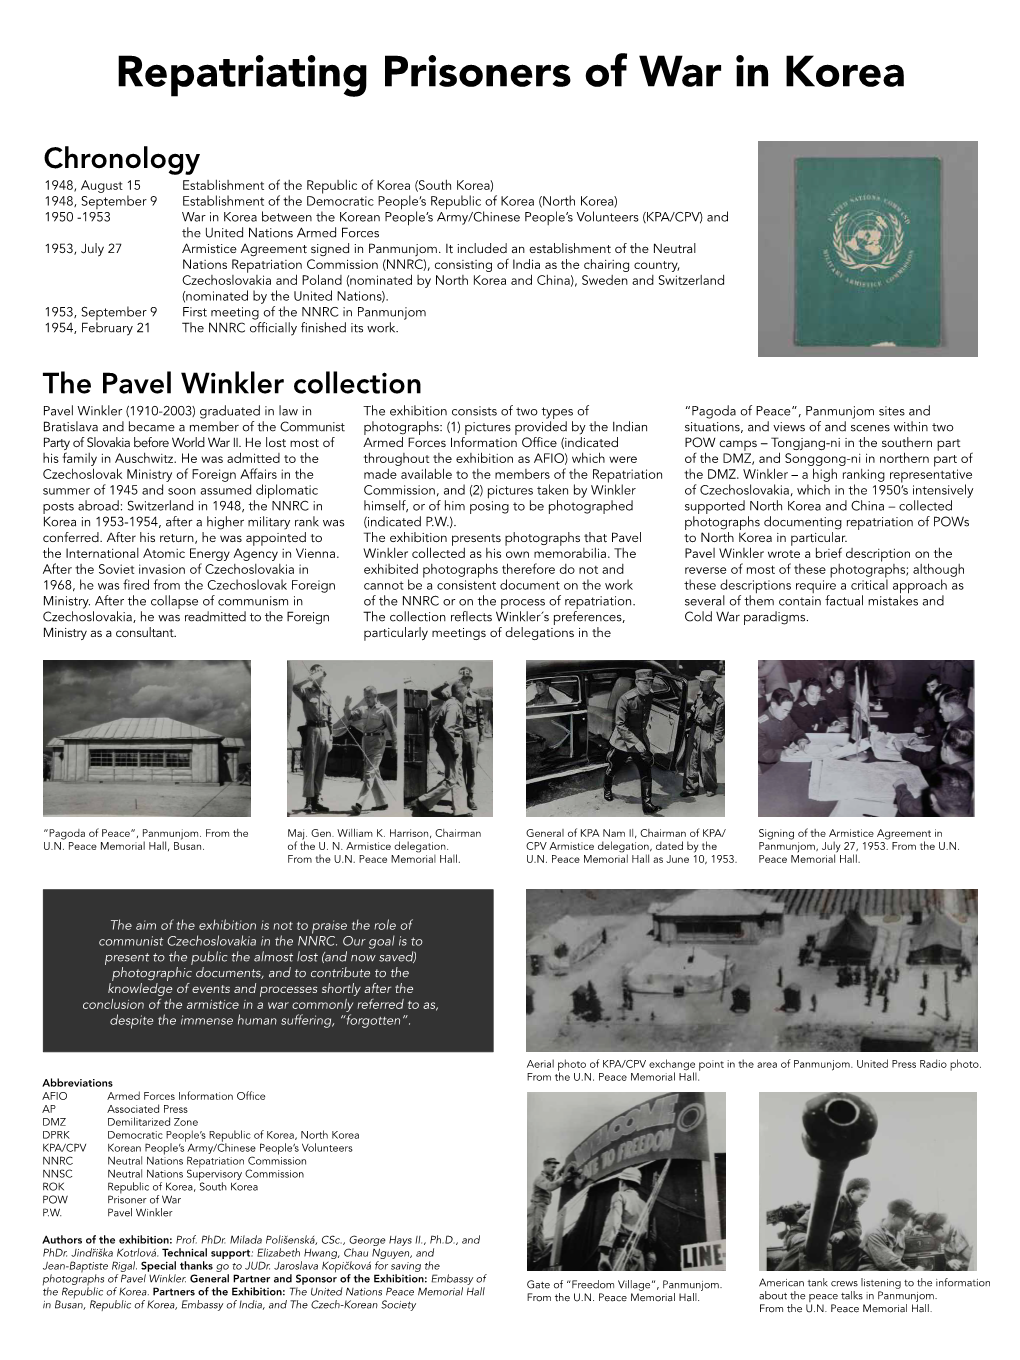 Chronology the Pavel Winkler Collection